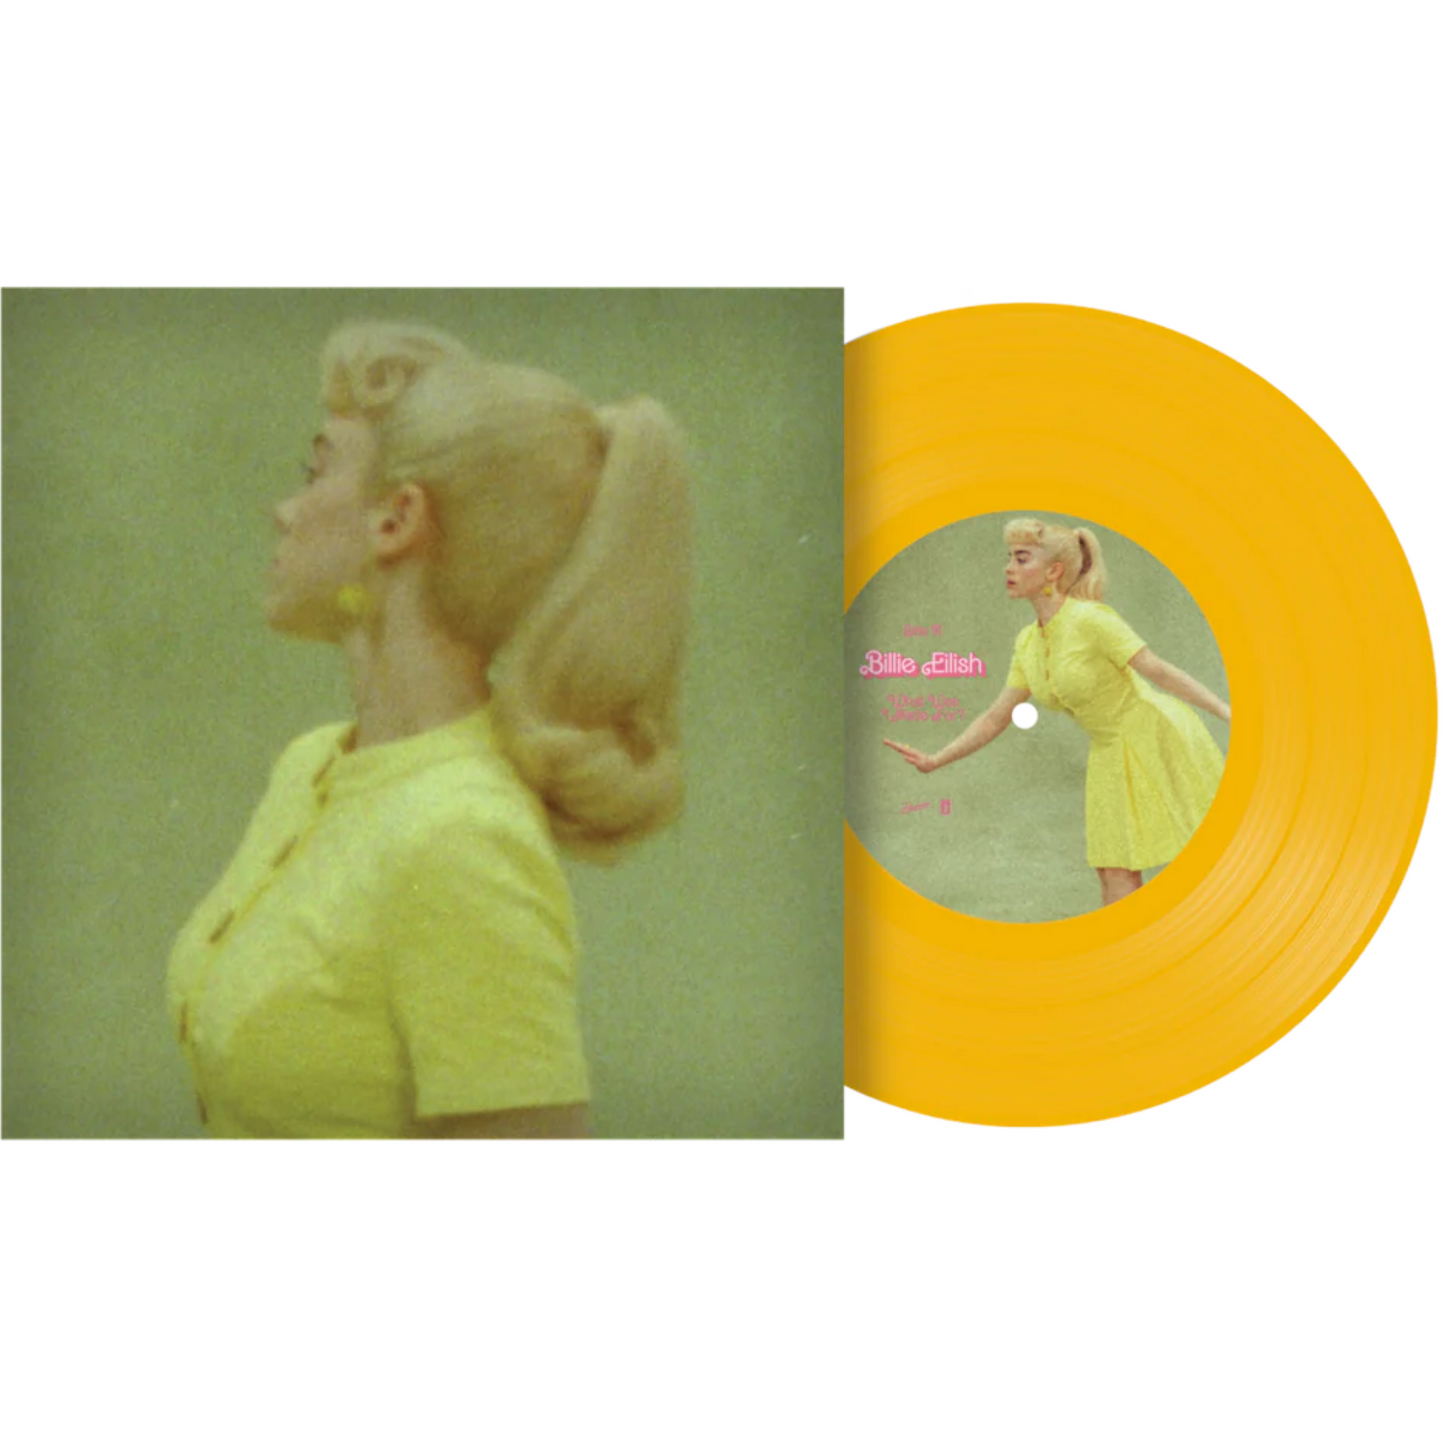 Billie-Eilish_What_Was_I_Made_For_Yellow_Vinyl_7